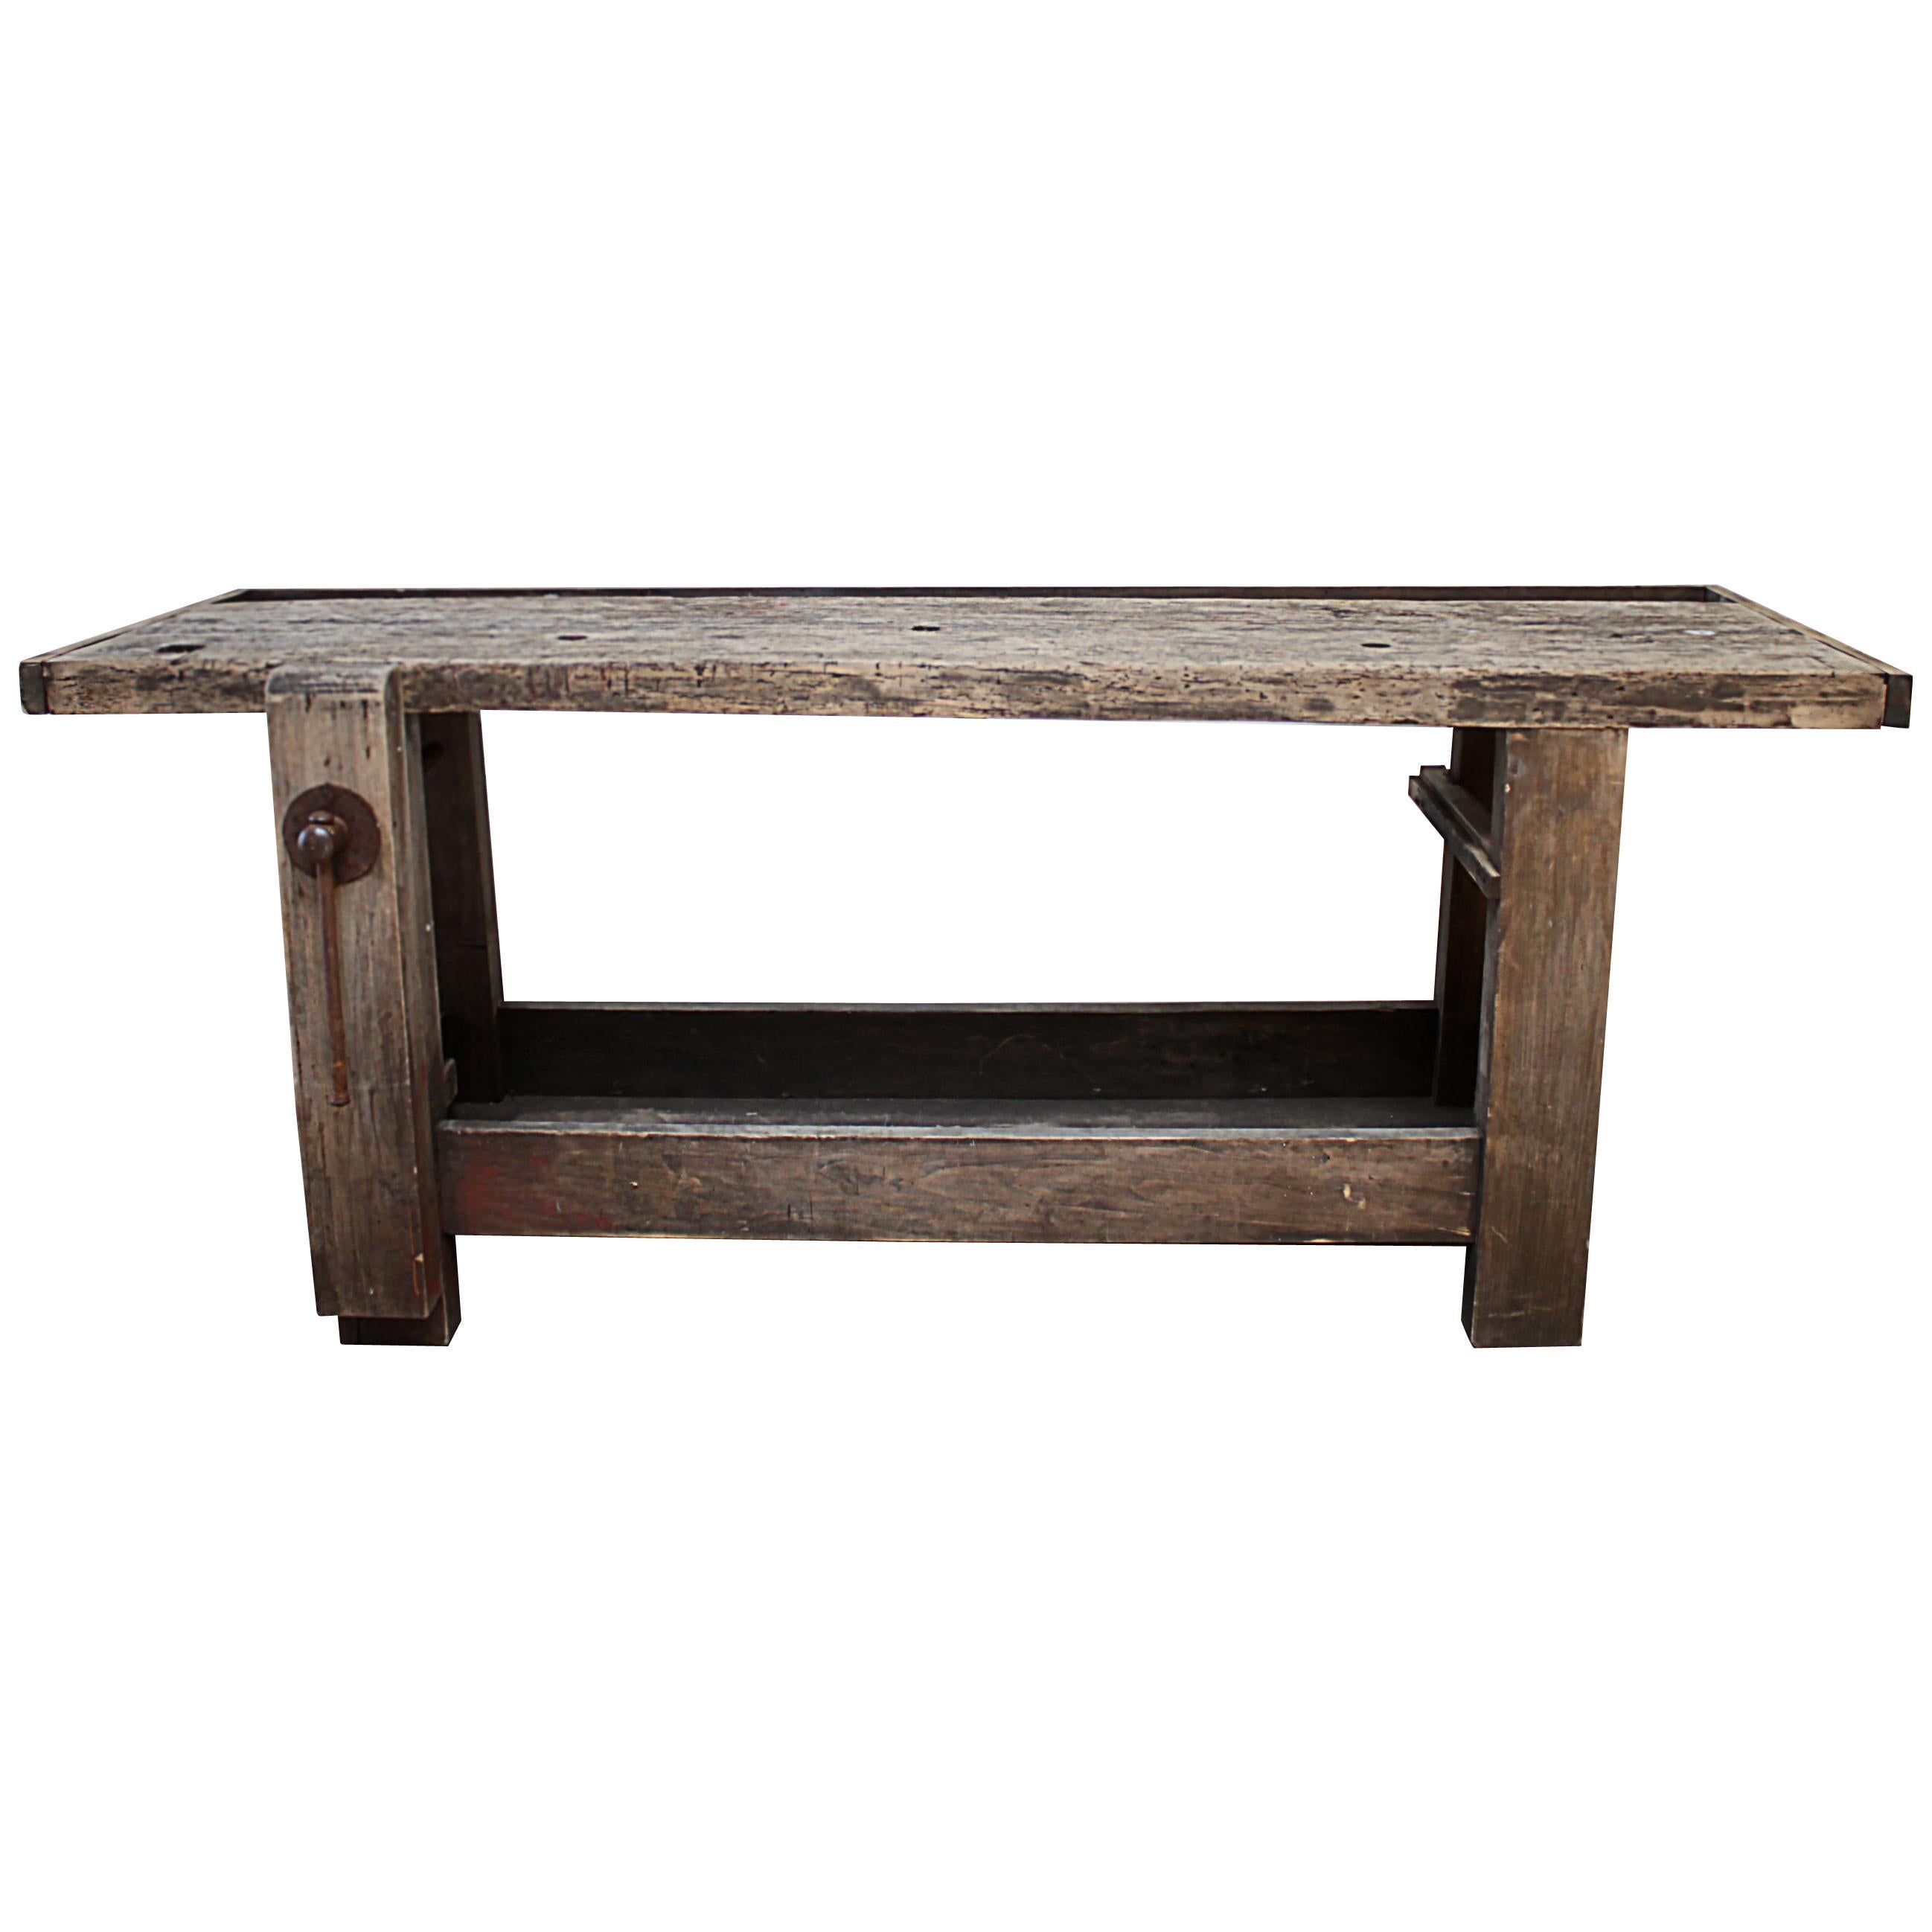 Early 20th Century Work Console Table with Original Hardware